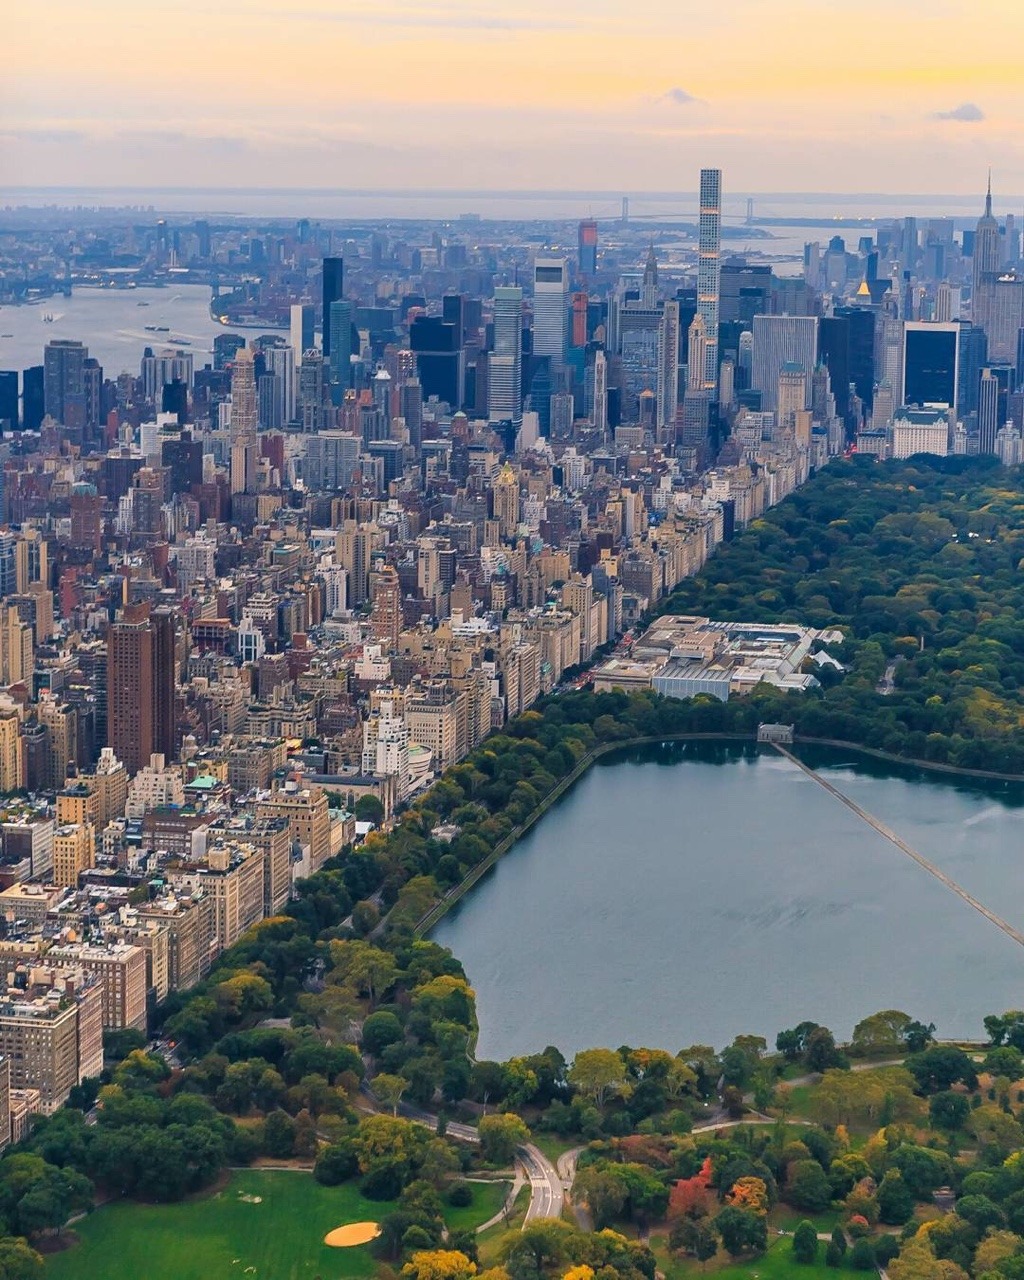 Central Park from above by @Killahwave